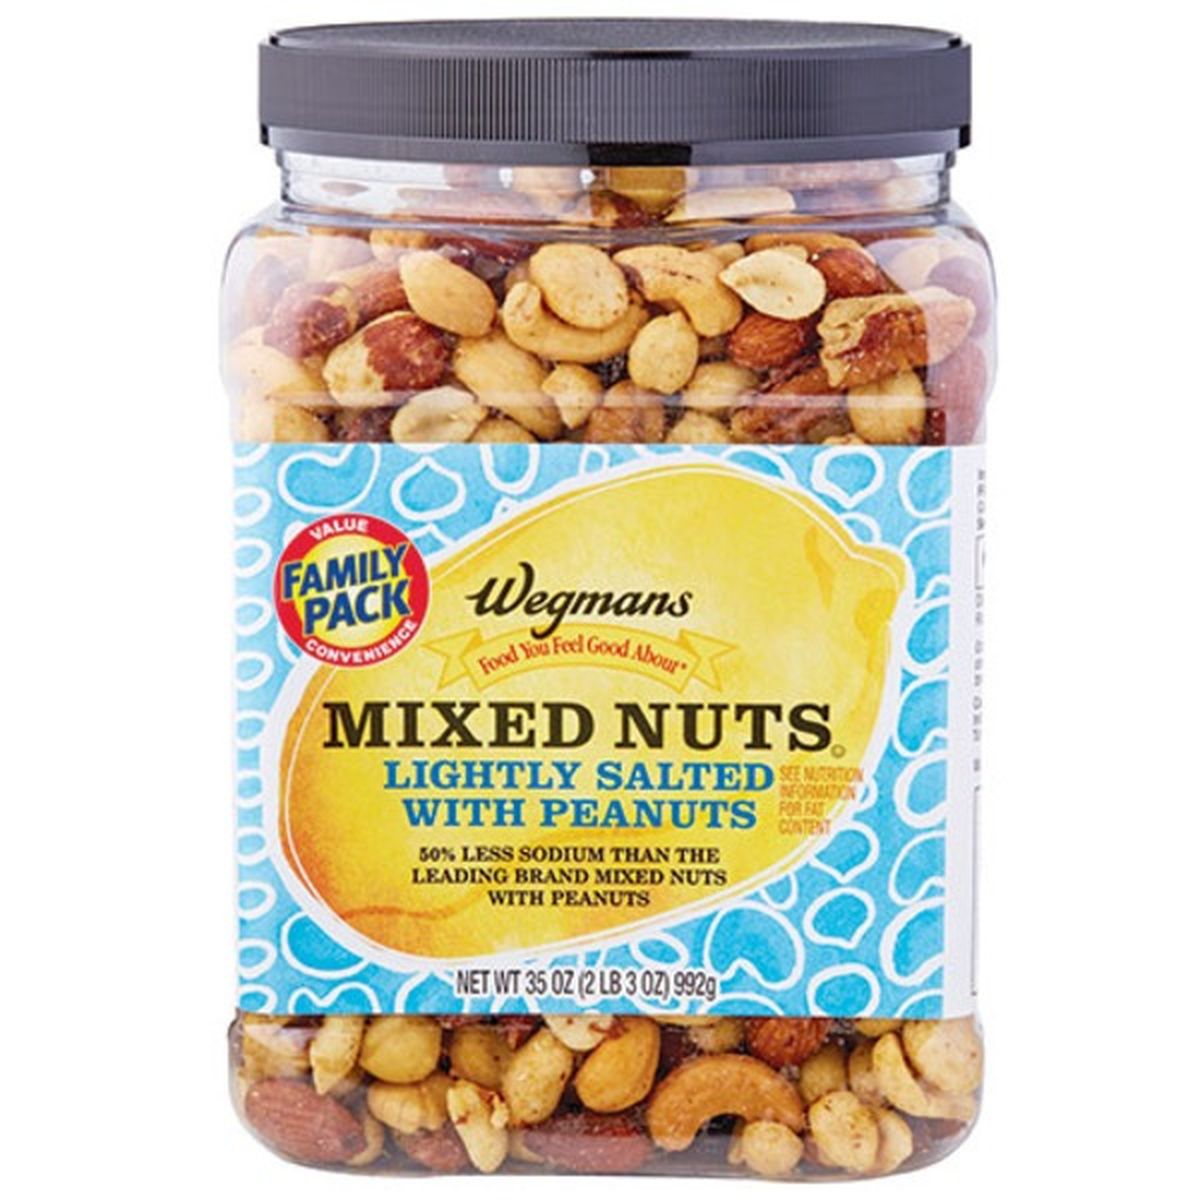 Calories in Wegmans Mixed Nuts Lightly Salted with Peanuts, FAMILY PACK